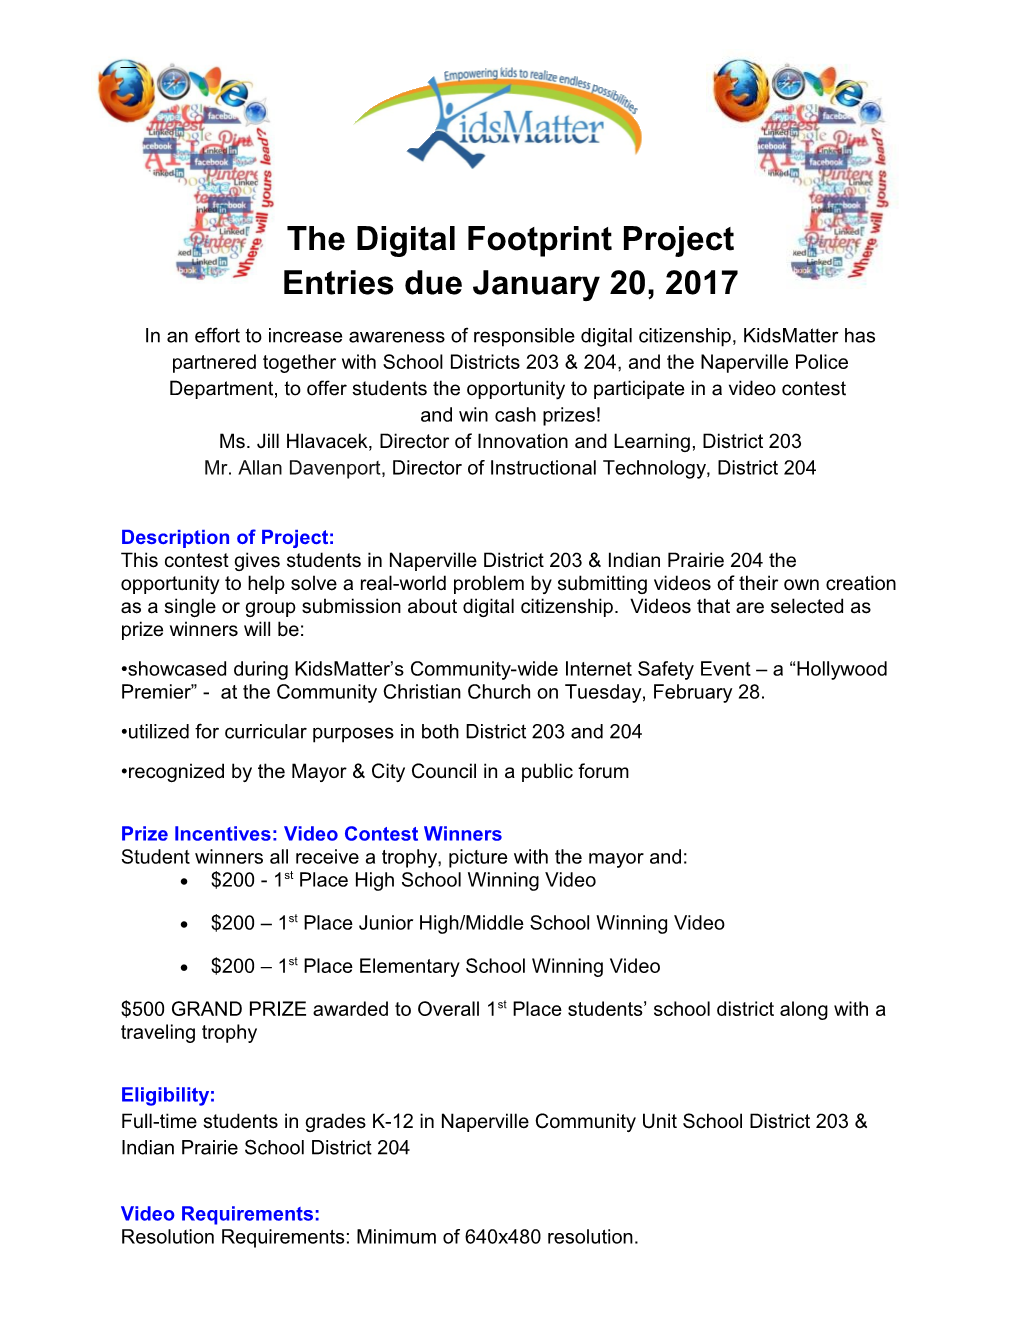 The Digital Footprint Project Entries Due January 20, 2017